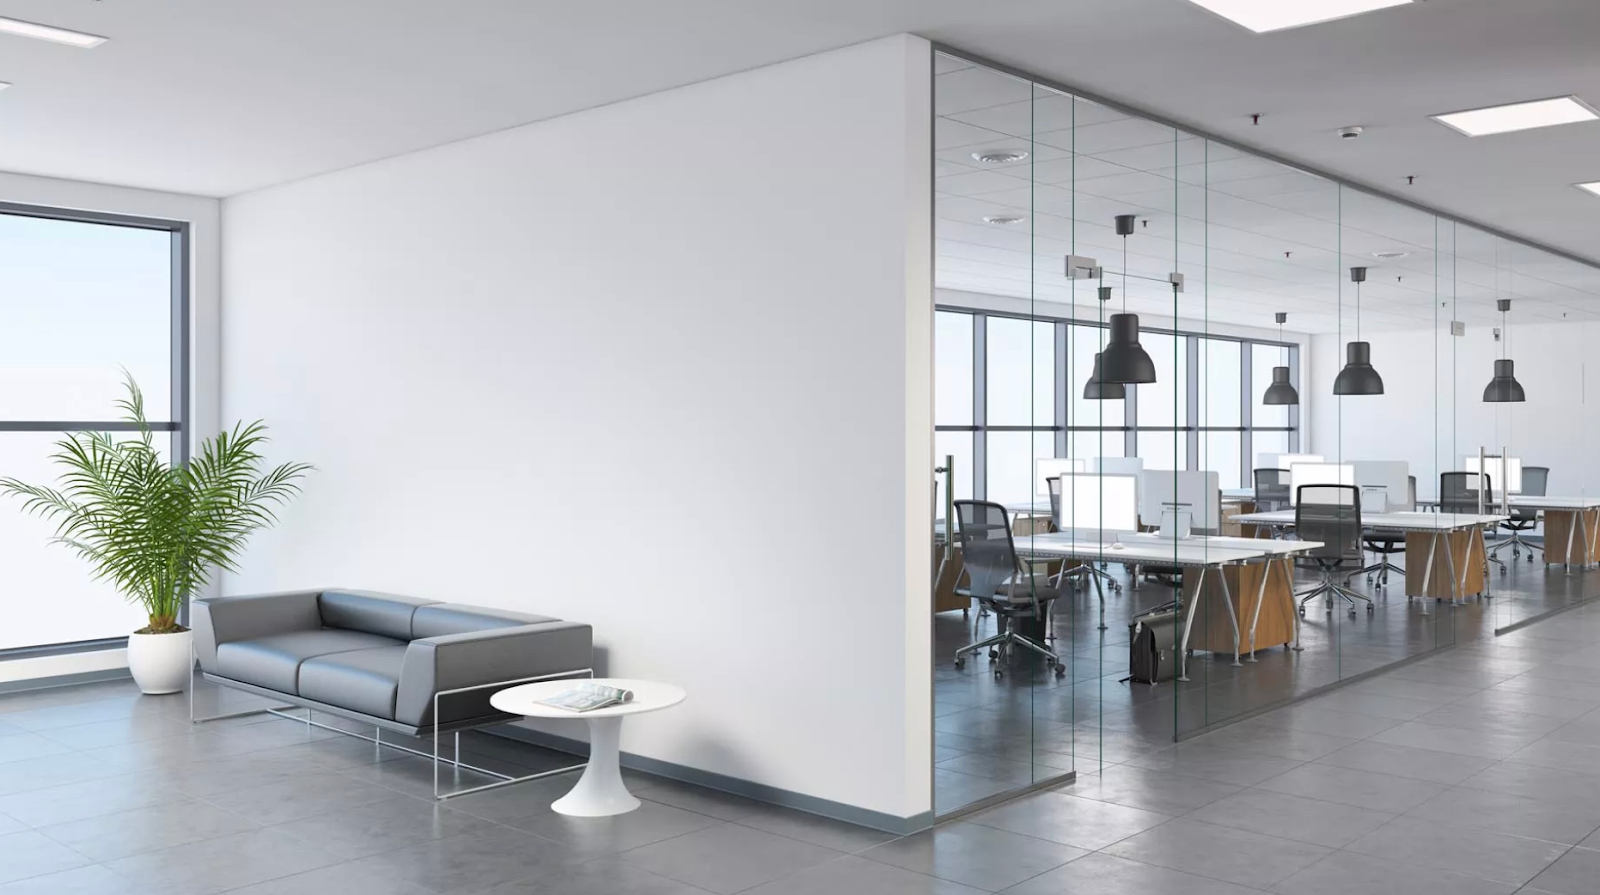 Glass walls reduce background noise. Source: LuxGlass